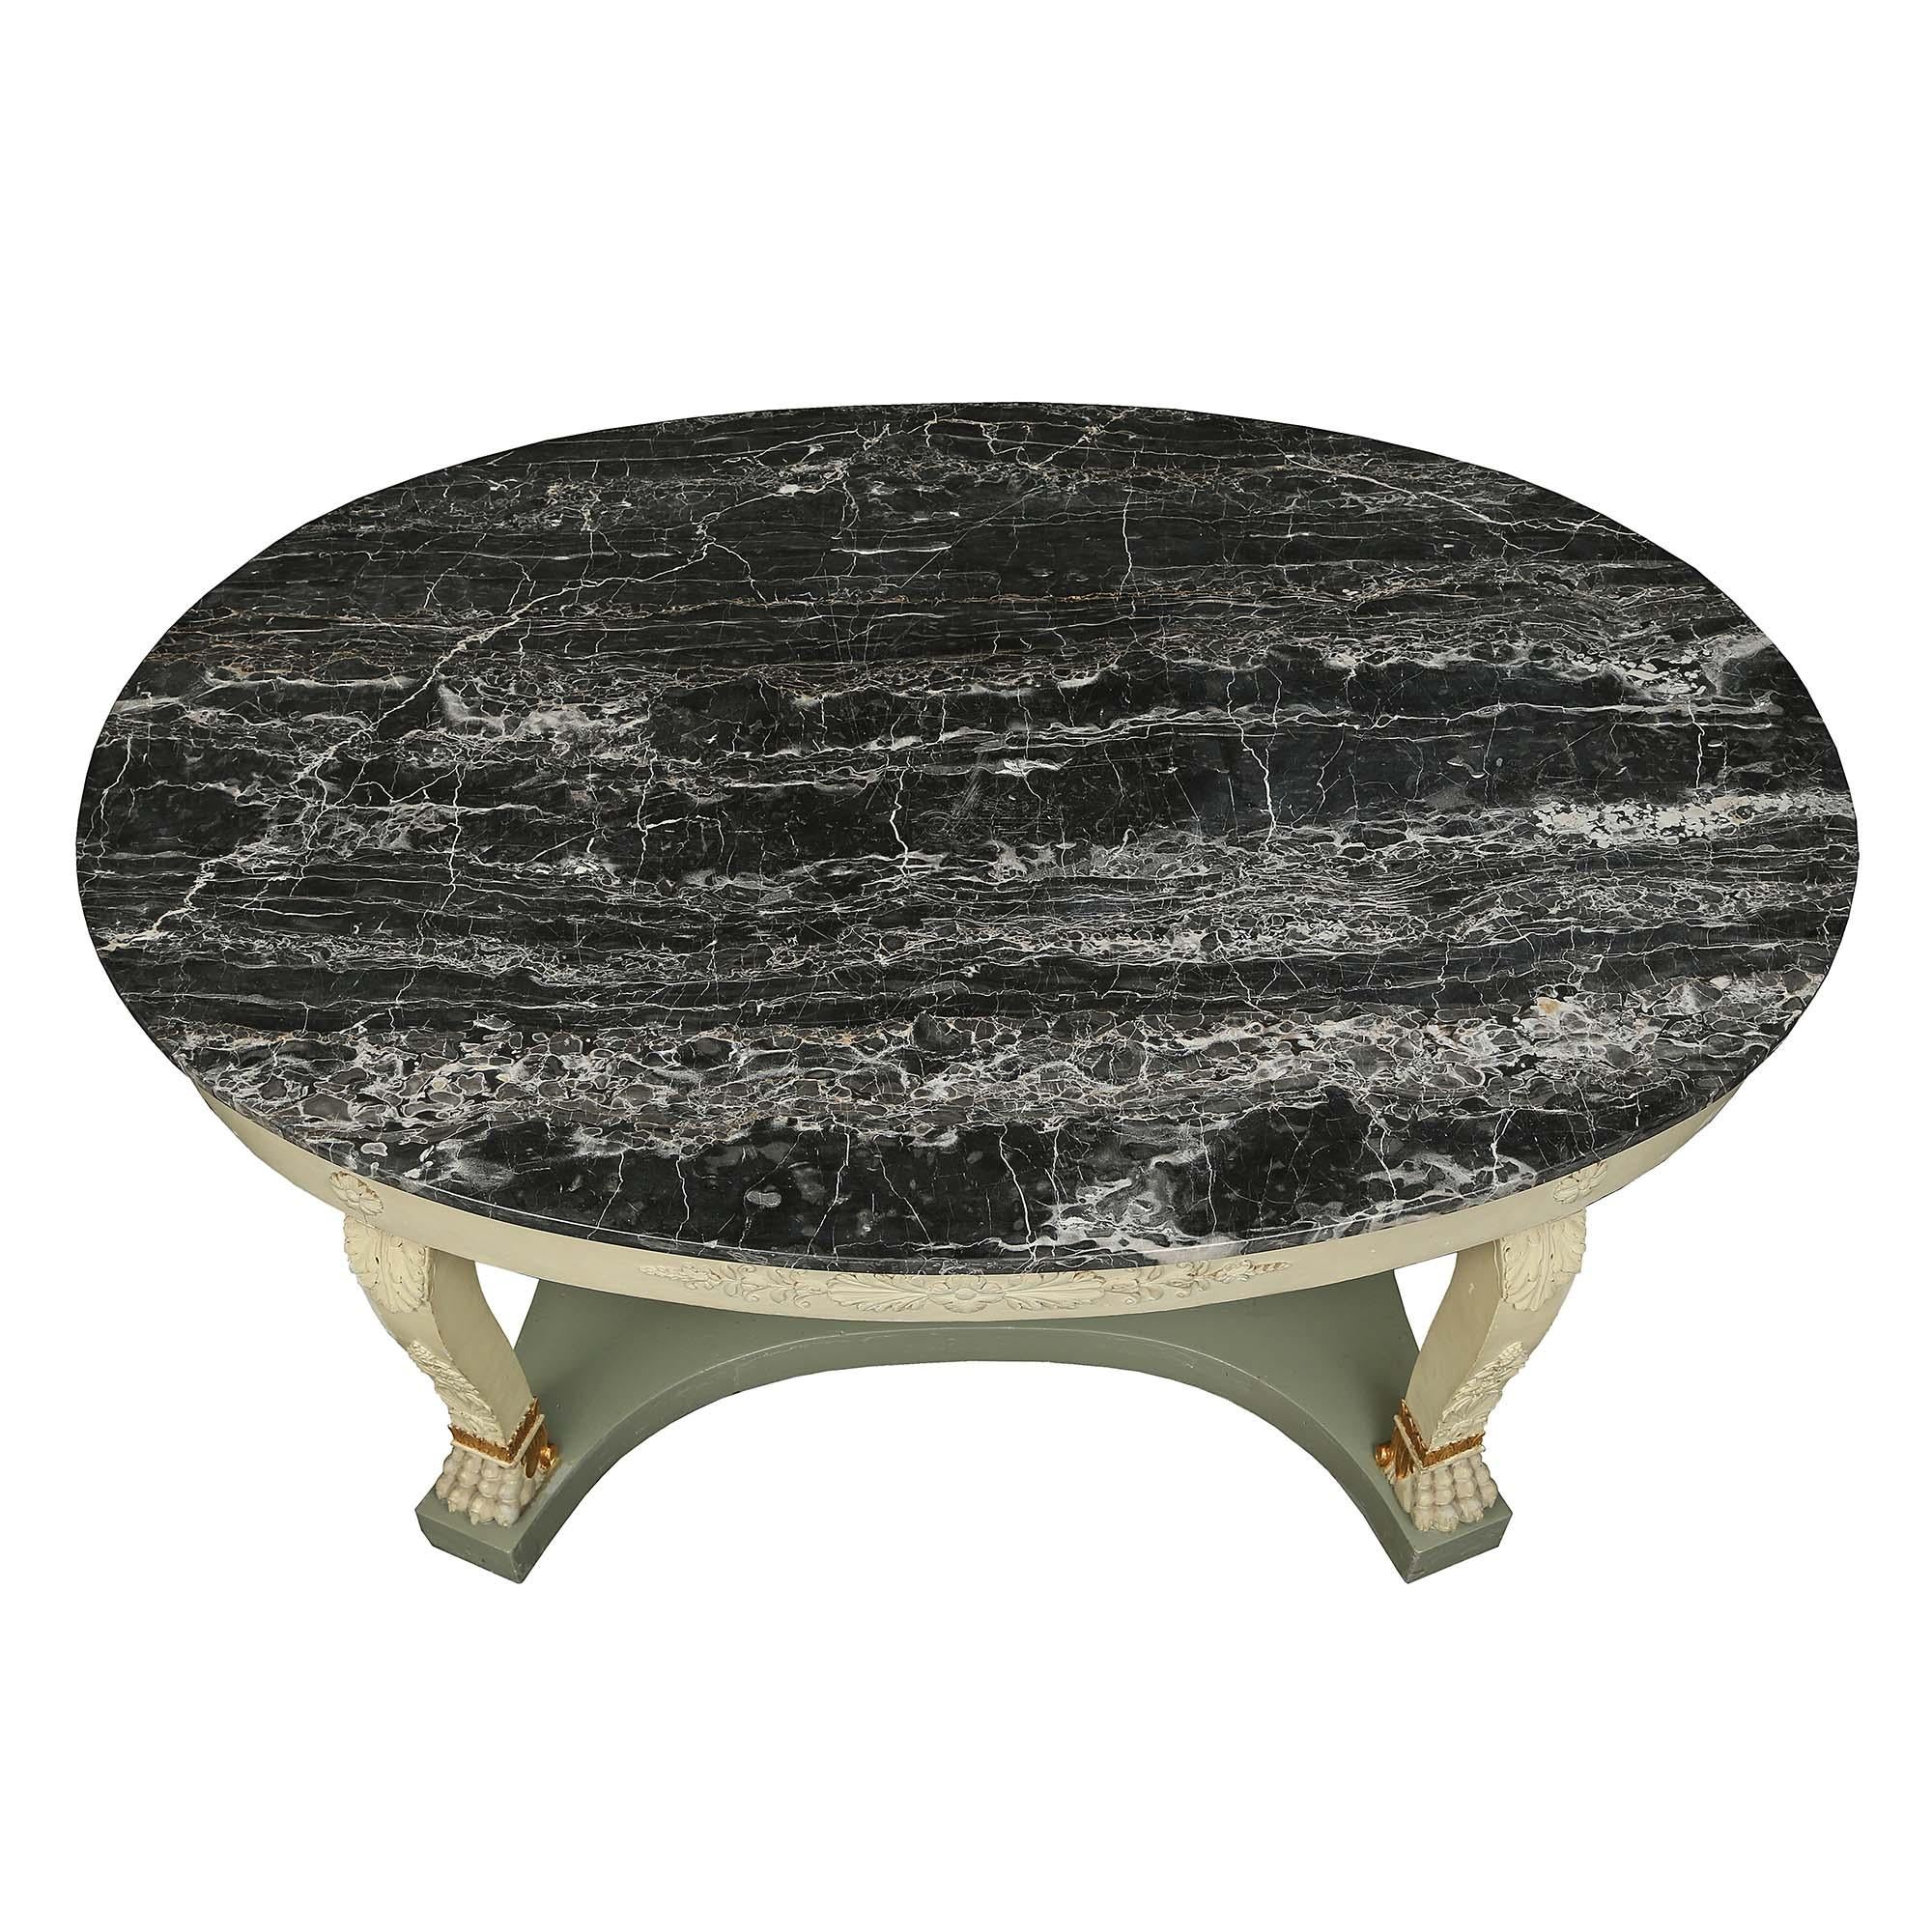 Italian 19th Century Neoclassical St. Patinated and Marble Oval Center Table In Good Condition For Sale In West Palm Beach, FL